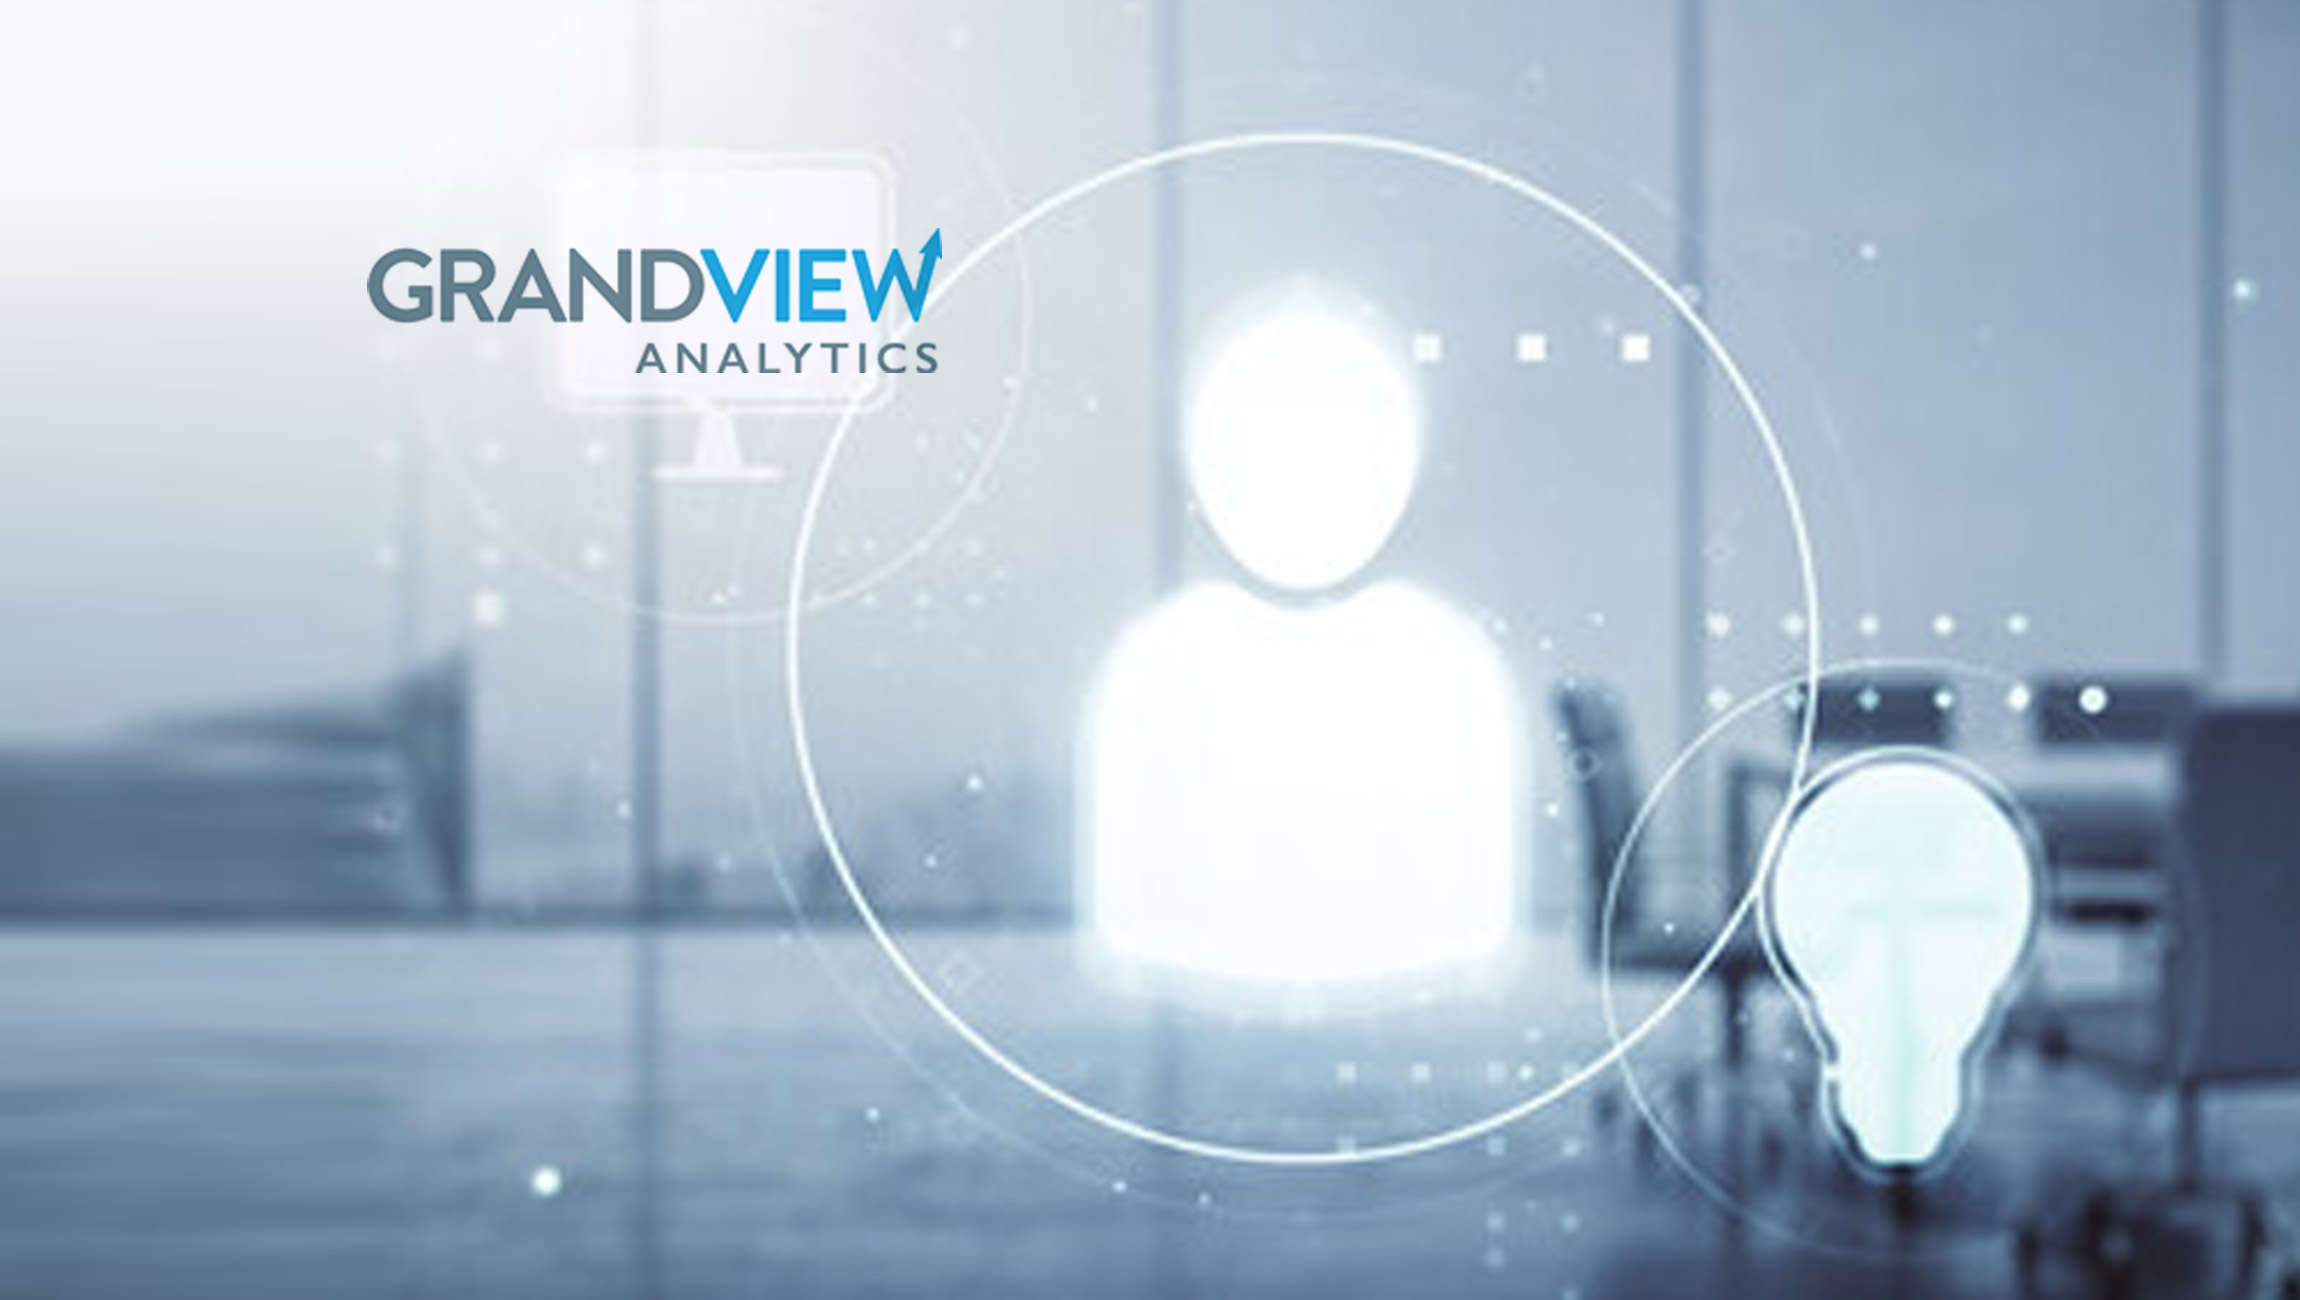 Grandview Analytics Selects David Toomey-Wilson to Lead Business Development for Managed Data Services